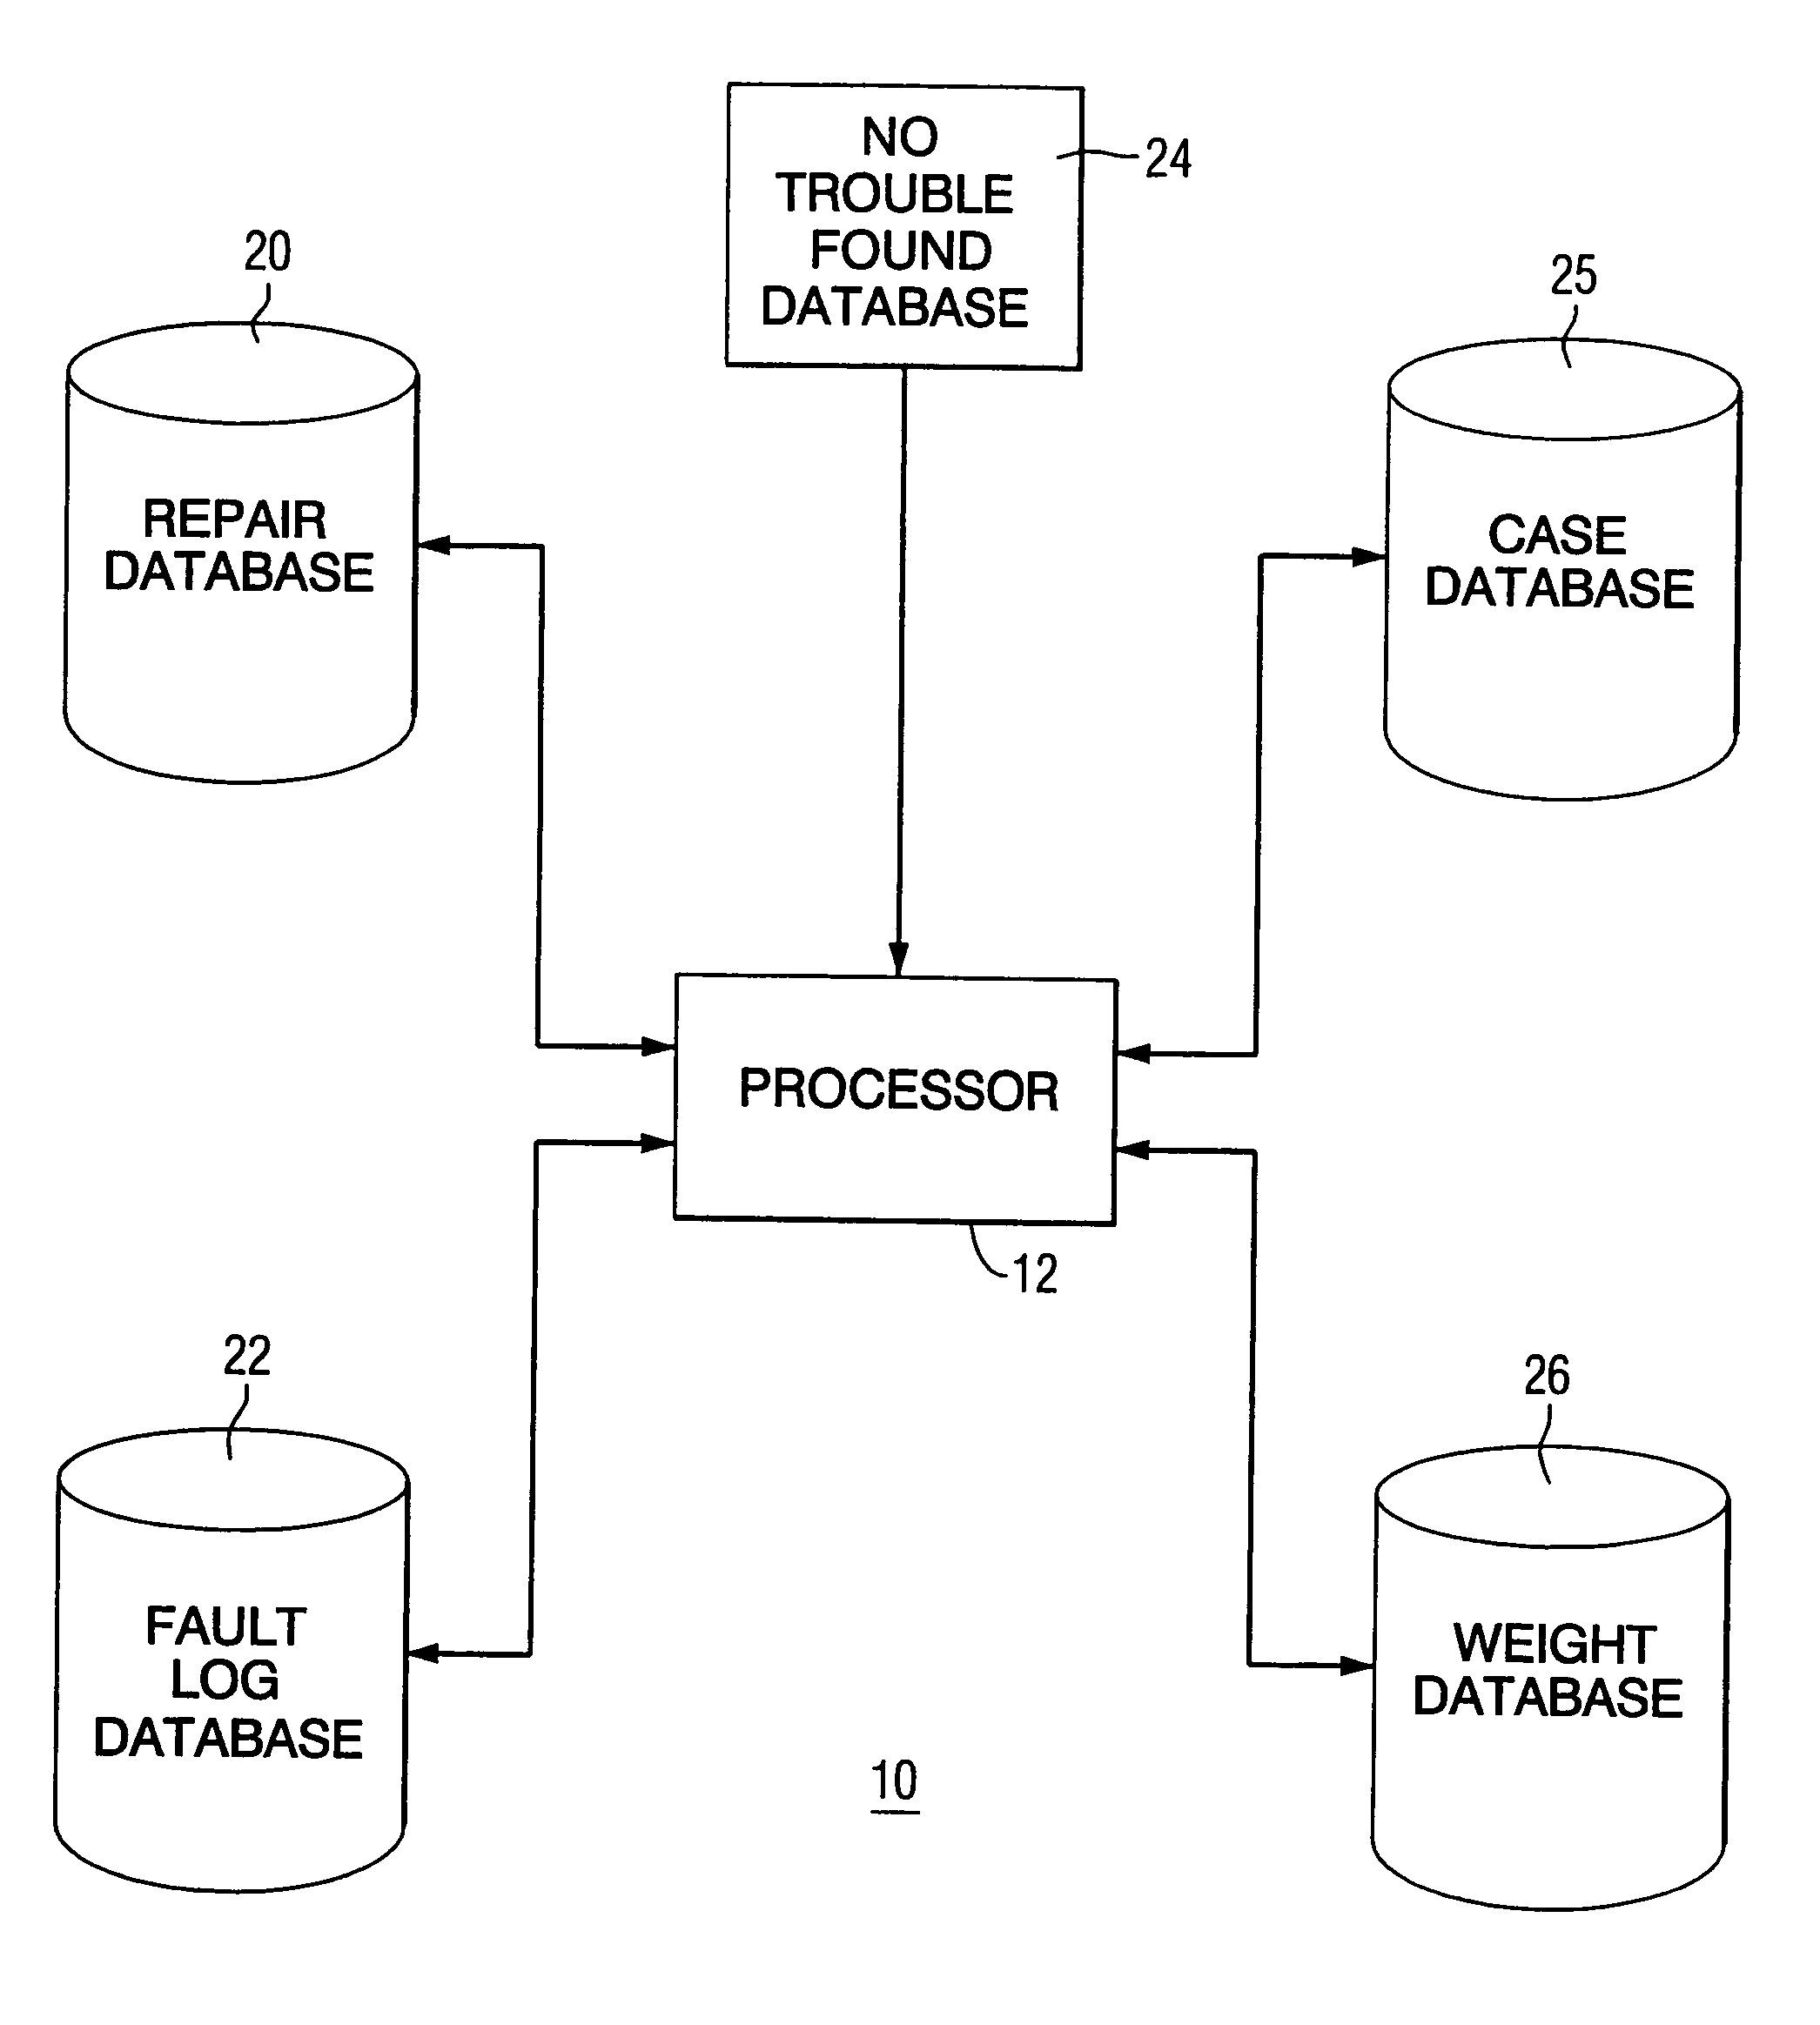 Method and apparatus for diagnosing difficult to diagnose faults in a complex system